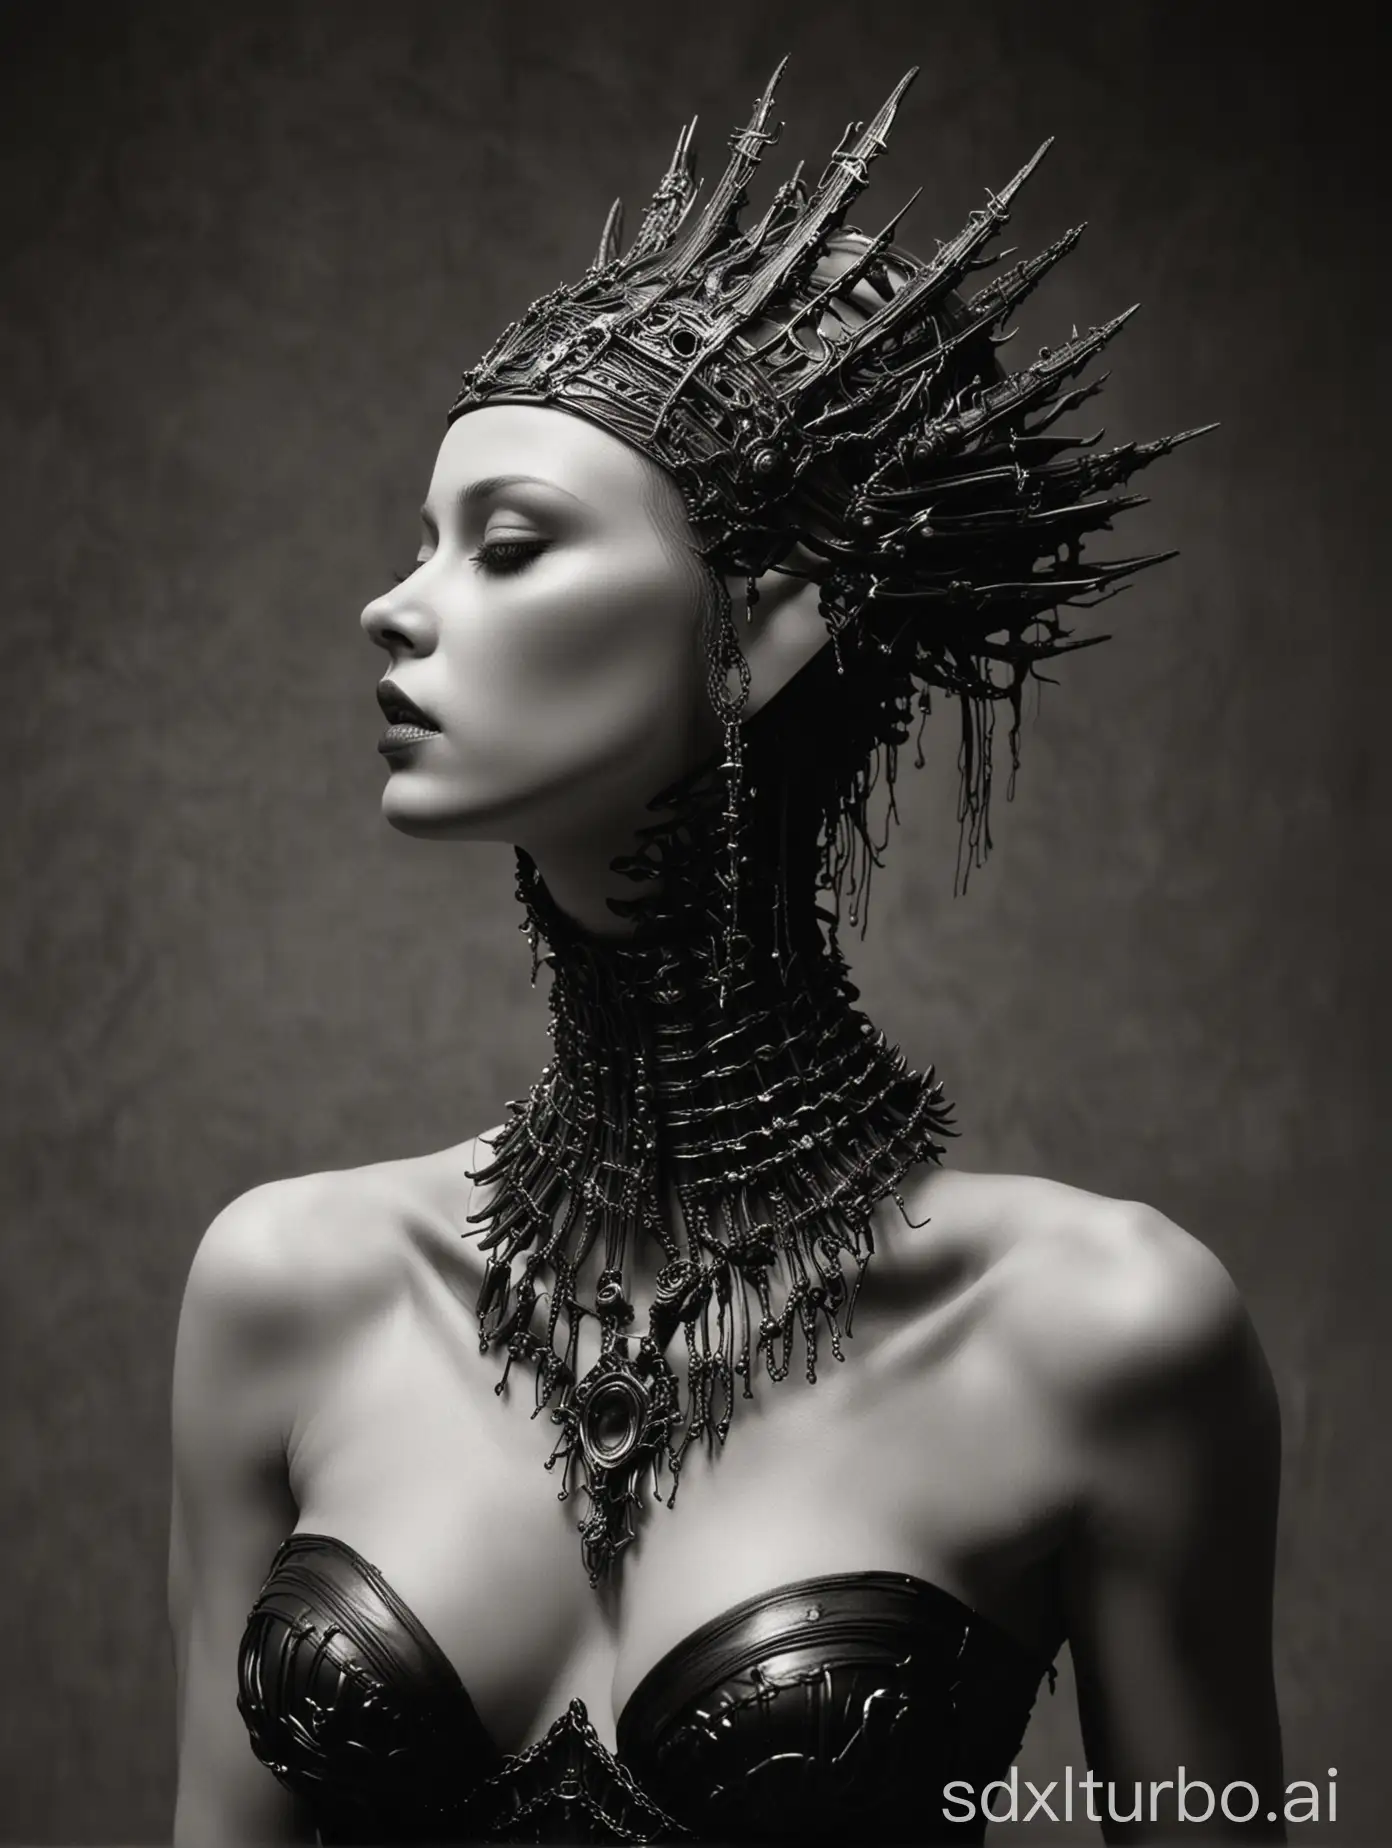 Giger Female with Beksinski tiara, extravagant choker and corset MeatRoots necklace, hero shot, side view, ballerina dancing, short hair or bald, light from below not above, black and white.